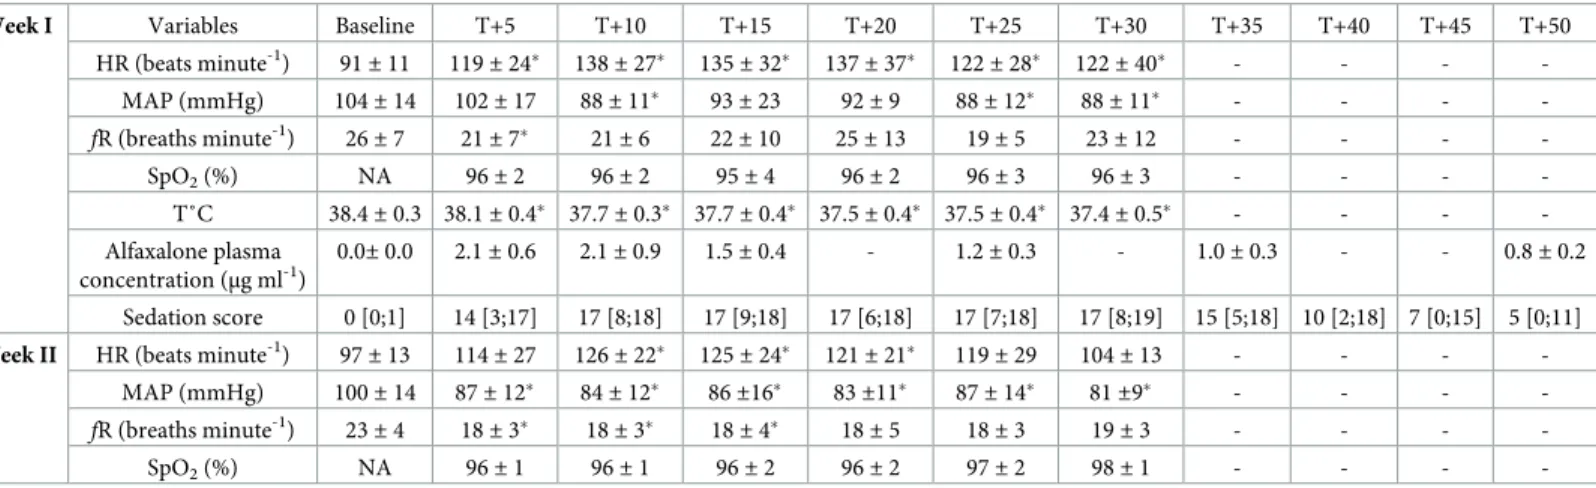 Table 1. Mean (± SD) cardiorespiratory variables, alfaxalone plasma concentration, and median (range) sedation scores following 4 mg kg -1 alfaxalone adminis- adminis-tered intramuscularly in healthy Beagles during sedation alone (week I) and during echoca